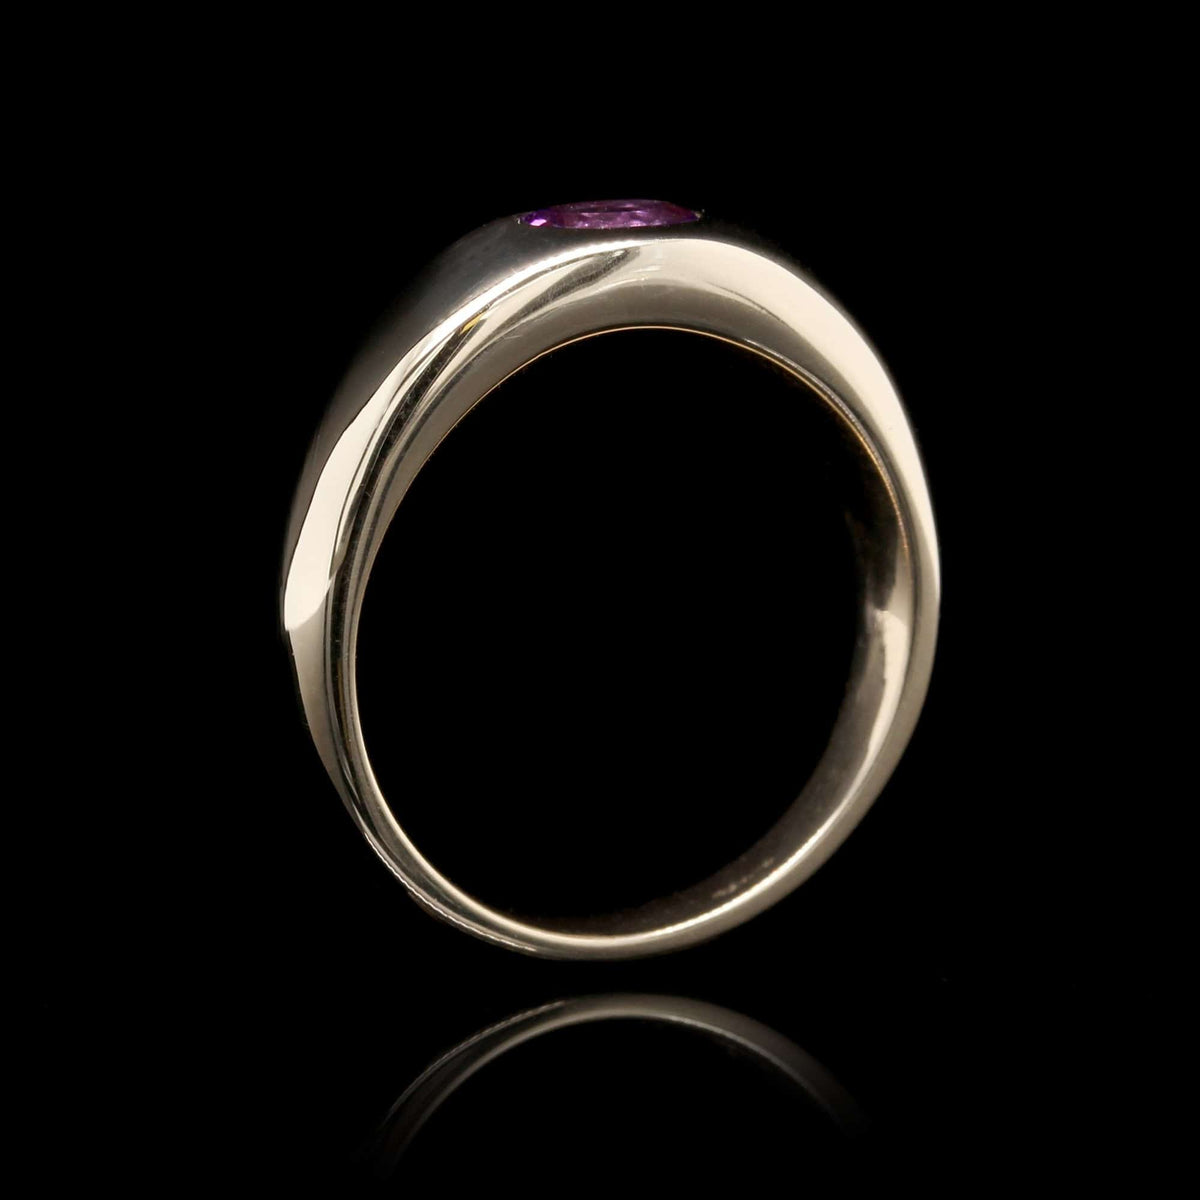 8mm Nebula Space Amethyst Black Tungsten Carbide Ring, Wedding Engagement  Band Birthday Anniversary Gift For Him And Her - AliExpress